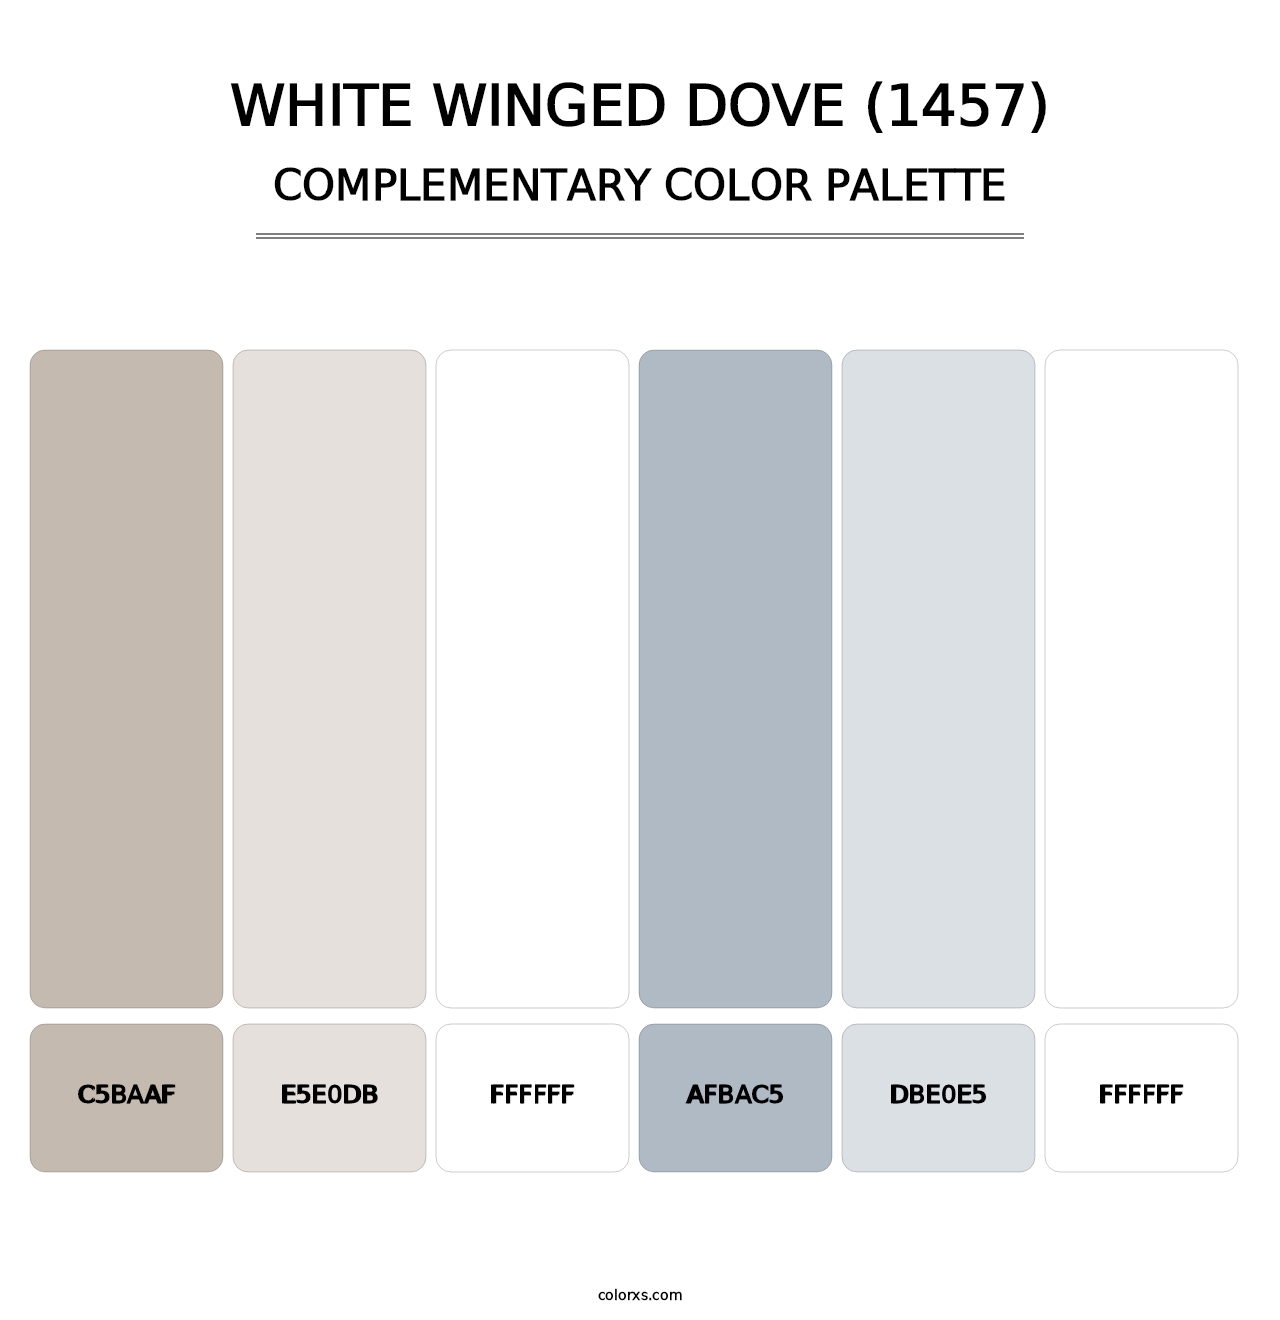 White Winged Dove (1457) - Complementary Color Palette